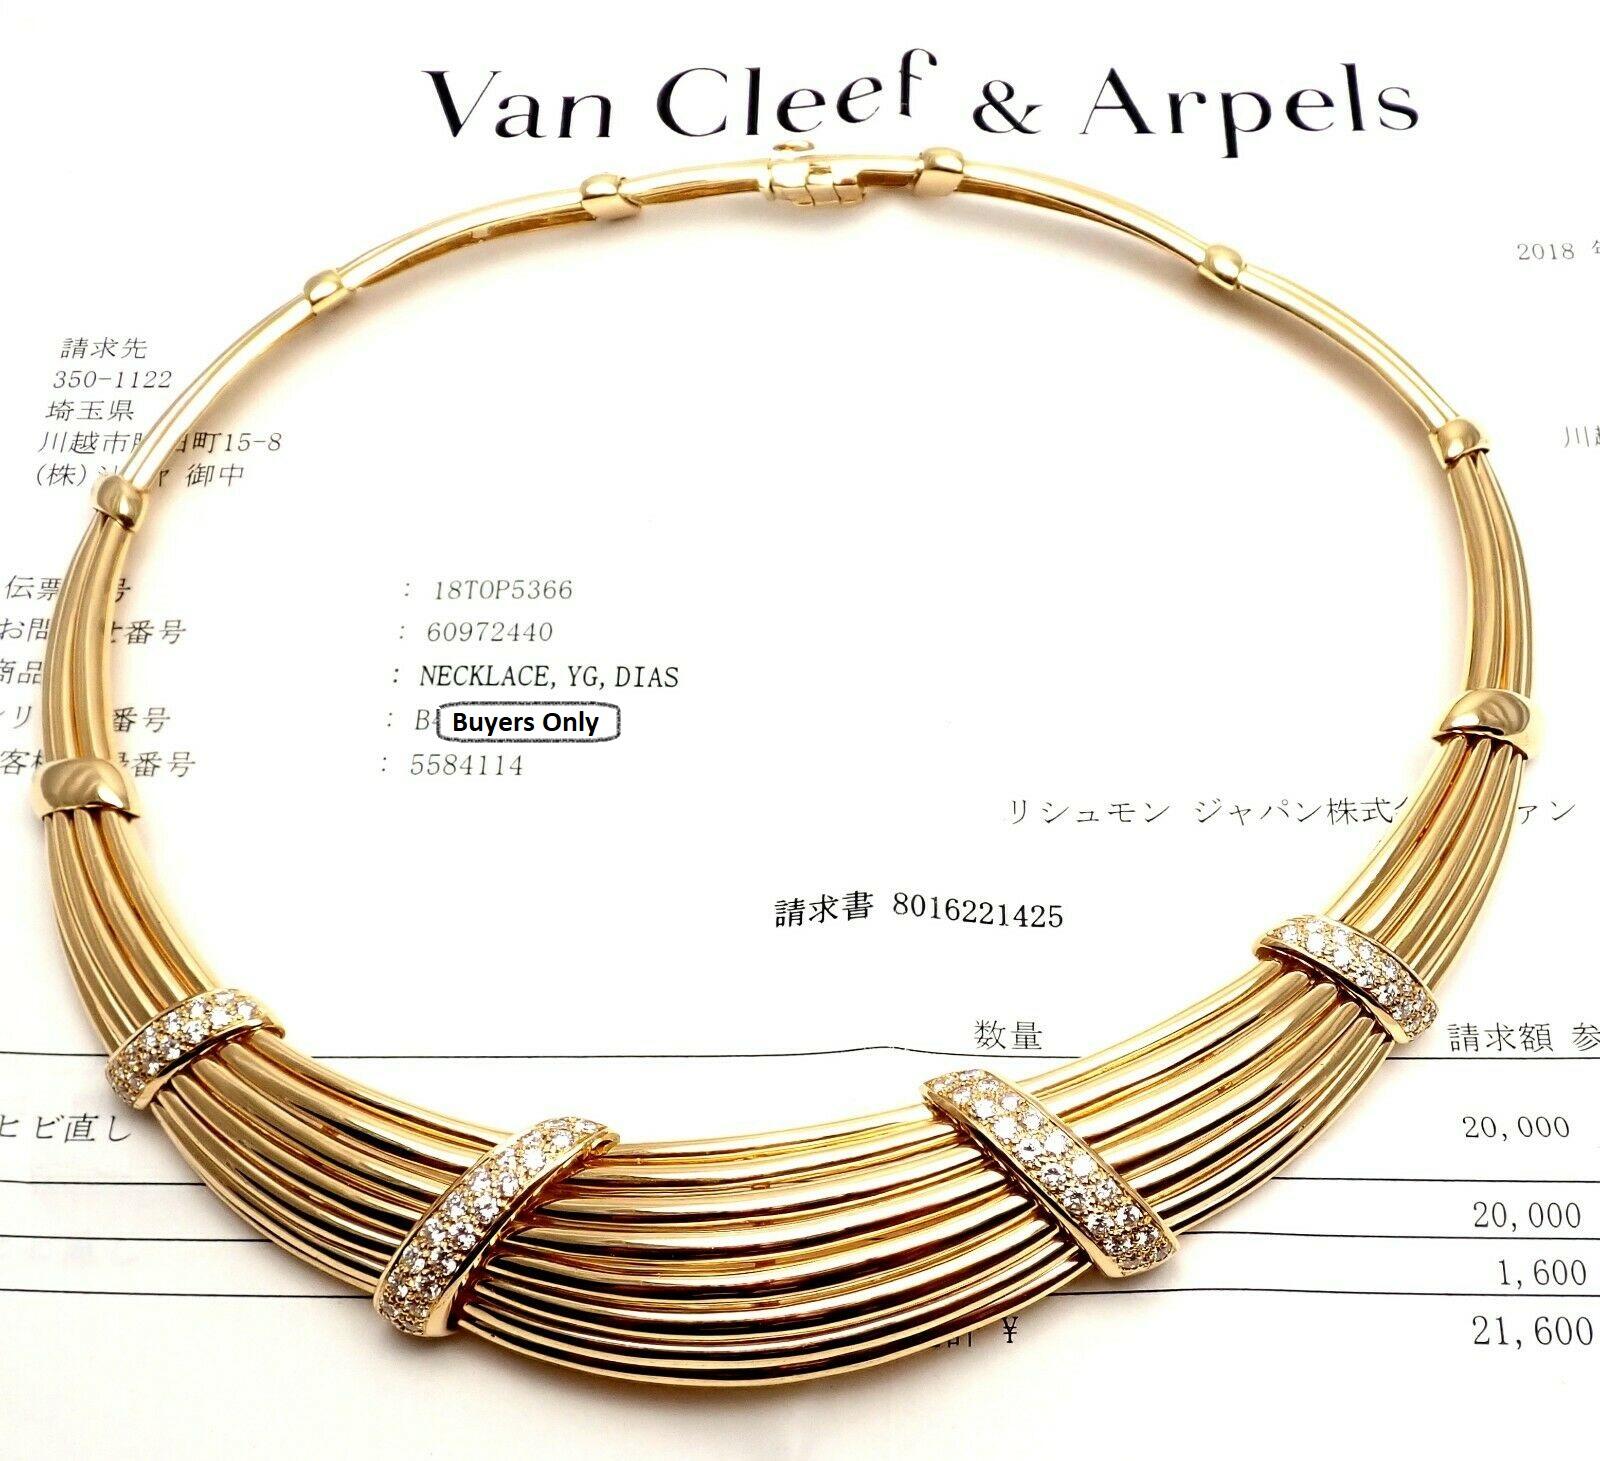 Van Cleef & Arpels Diamond Yellow Gold Choker Necklace For Sale 5